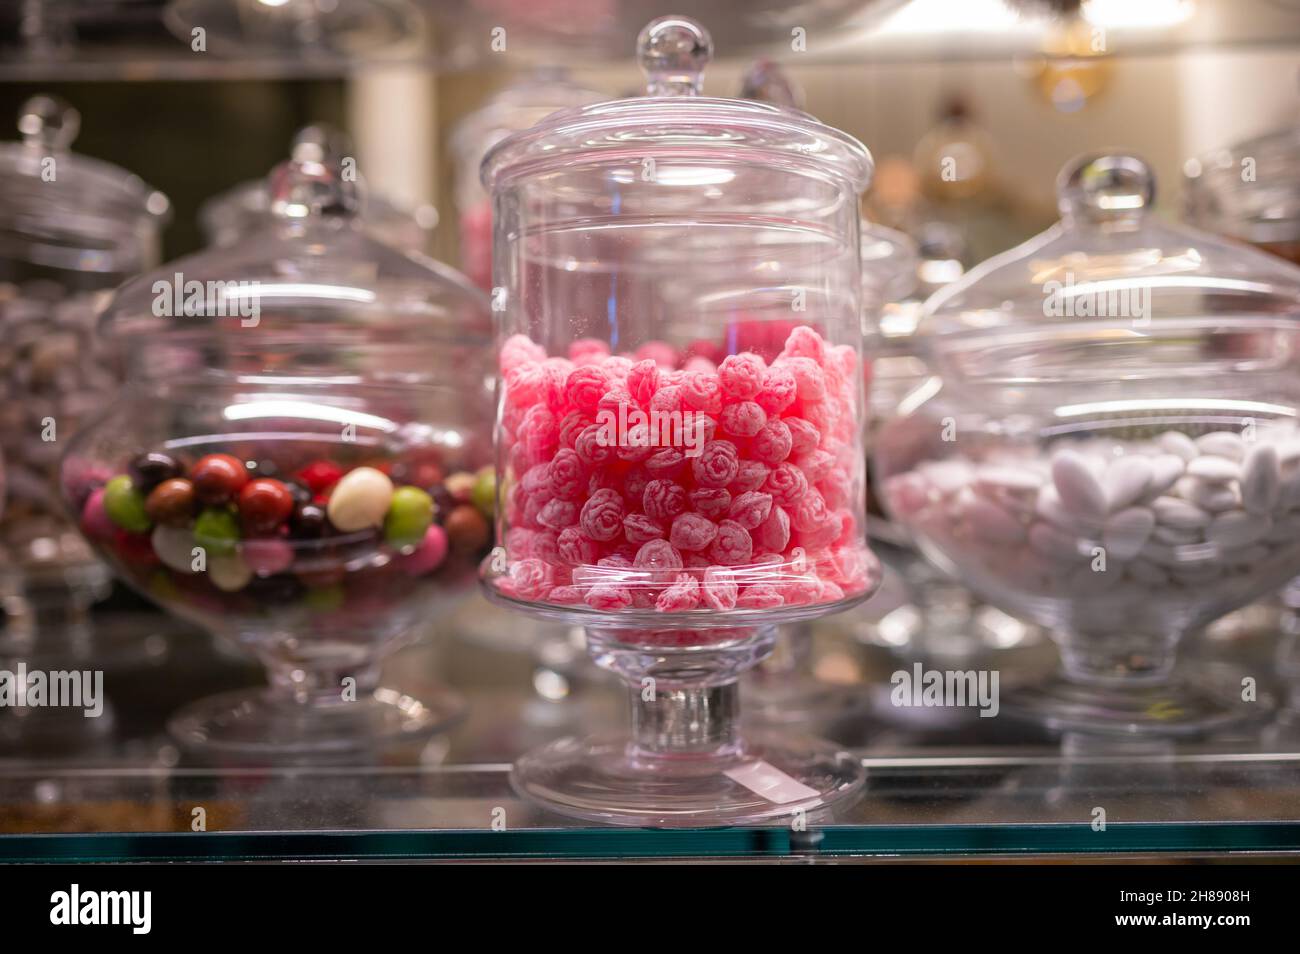 Candy shop display with glass jars filled with jelly candies and bonbons  close up Stock Photo - Alamy